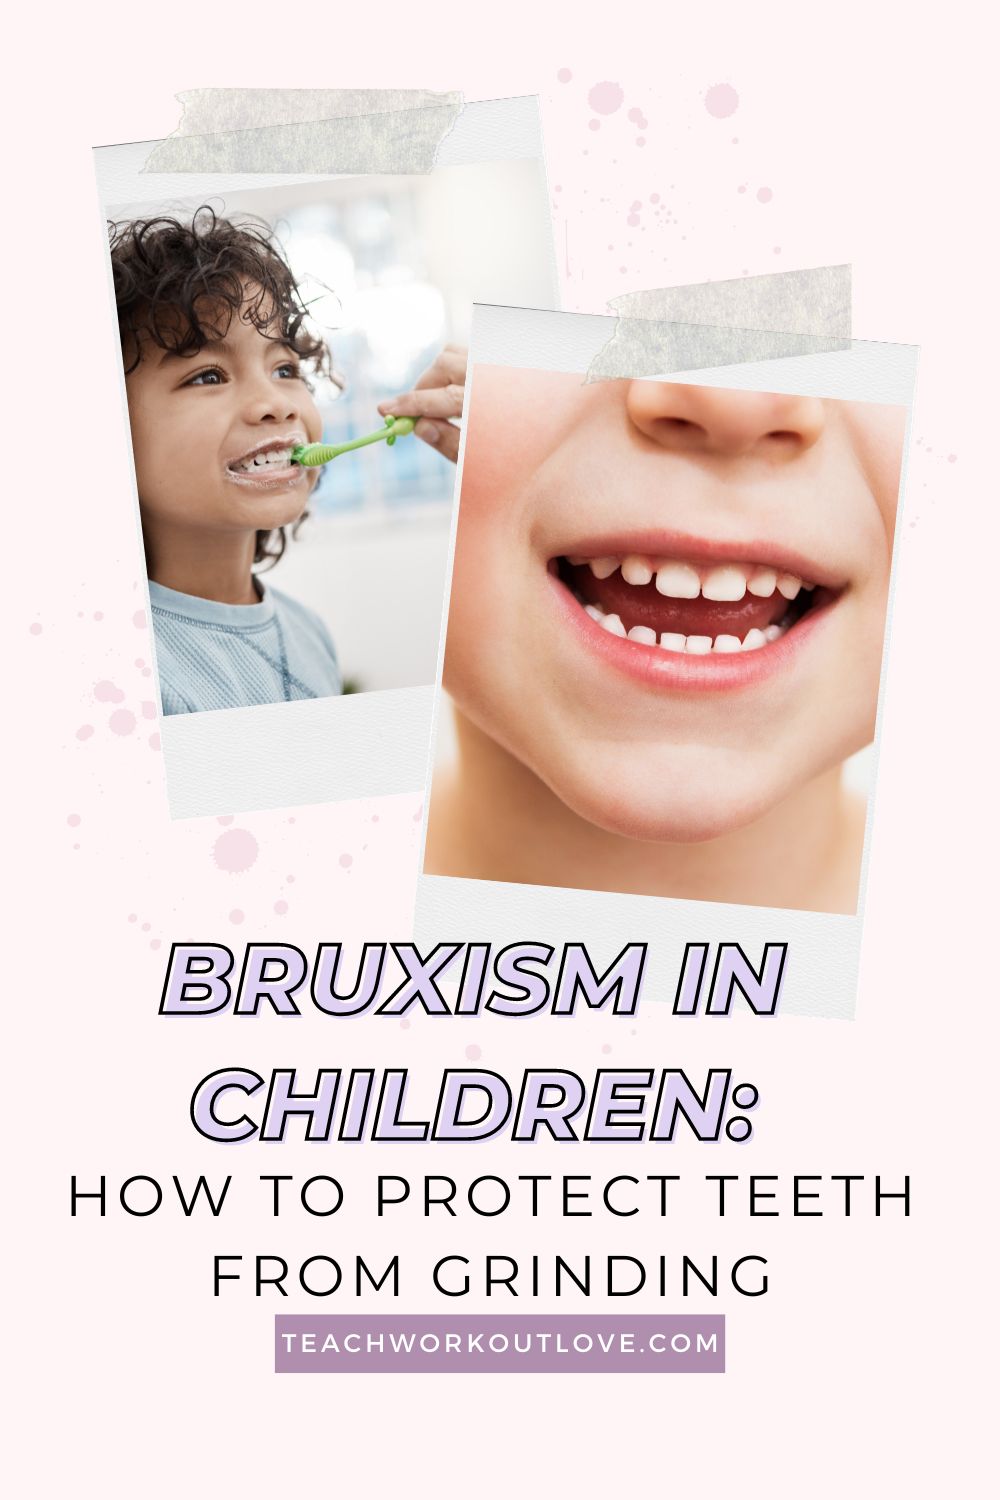 In this article, we will look at the problems associated with bruxism in children and the role of pediatric dentists in protecting their teeth from nightly grinding.